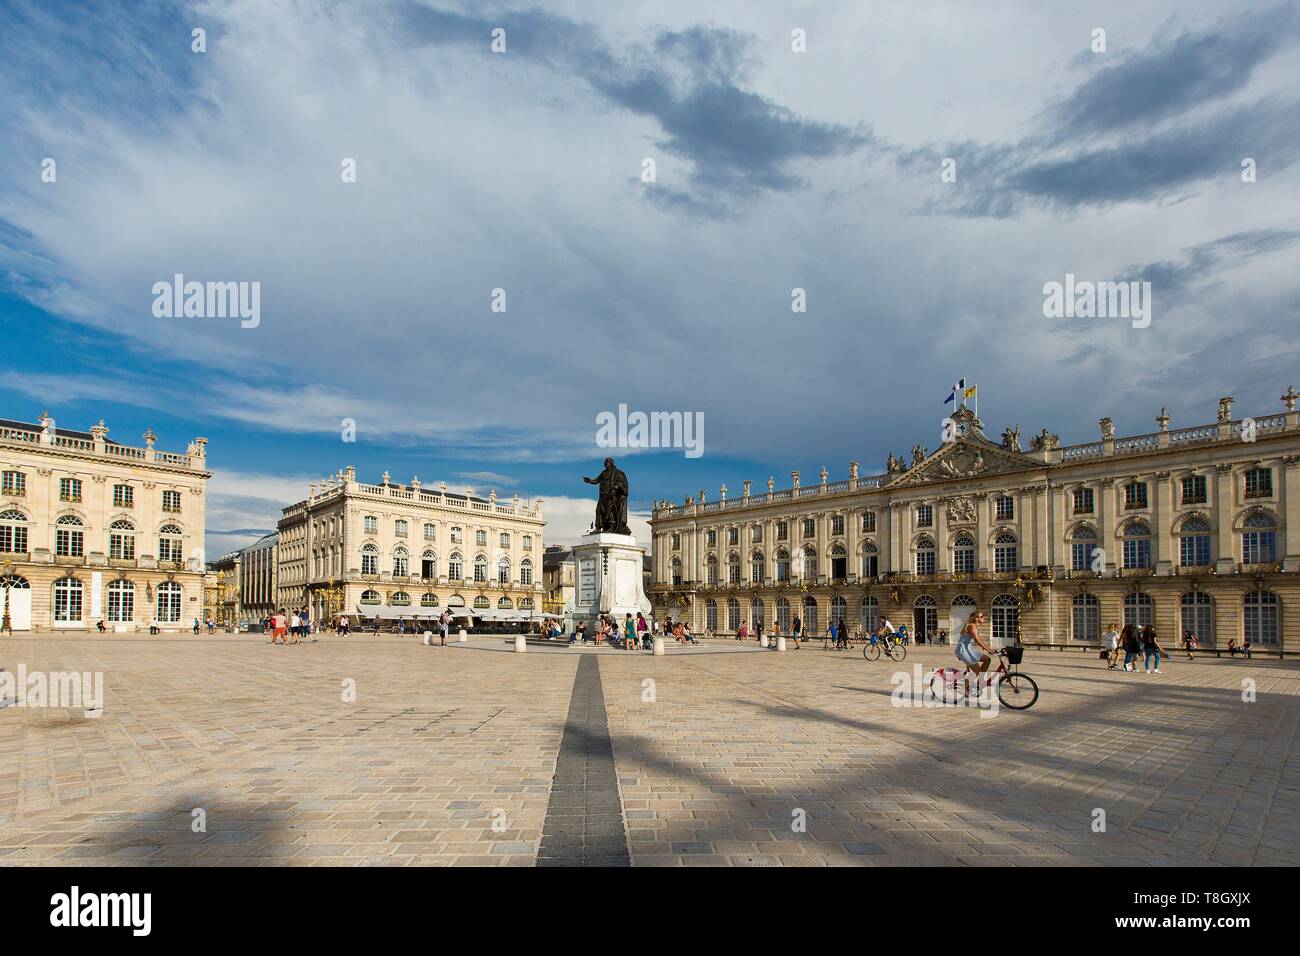 France, Meurthe et Moselle, Nancy, Stanislas square (former royal square) built by Stanislas Lescynski, king of Poland and last duke of Lorraine in the 18th century, listed as World Heritage by UNESCO, facades of the Opera house, the town hall and the Grand Hotel restaurant Stock Photo